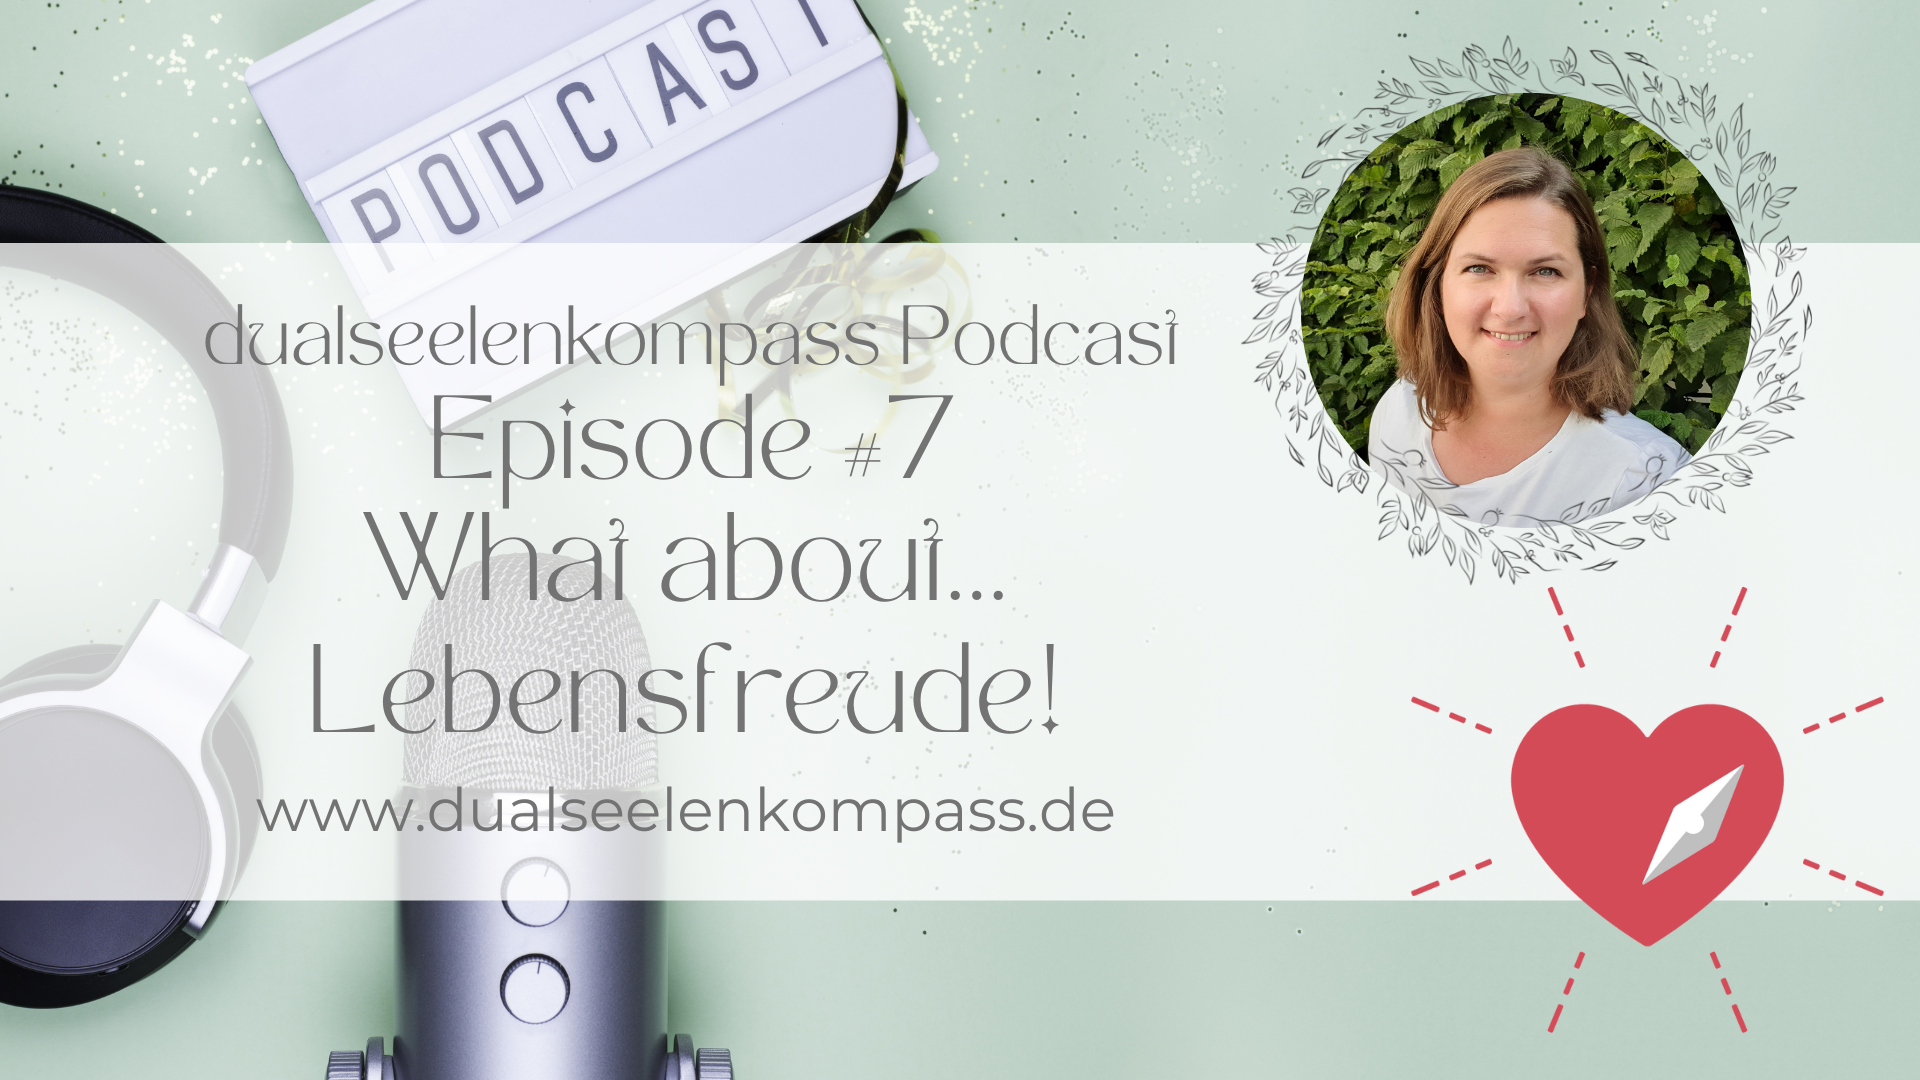 Podcast! Episode #7 - What About... Lebensfreude